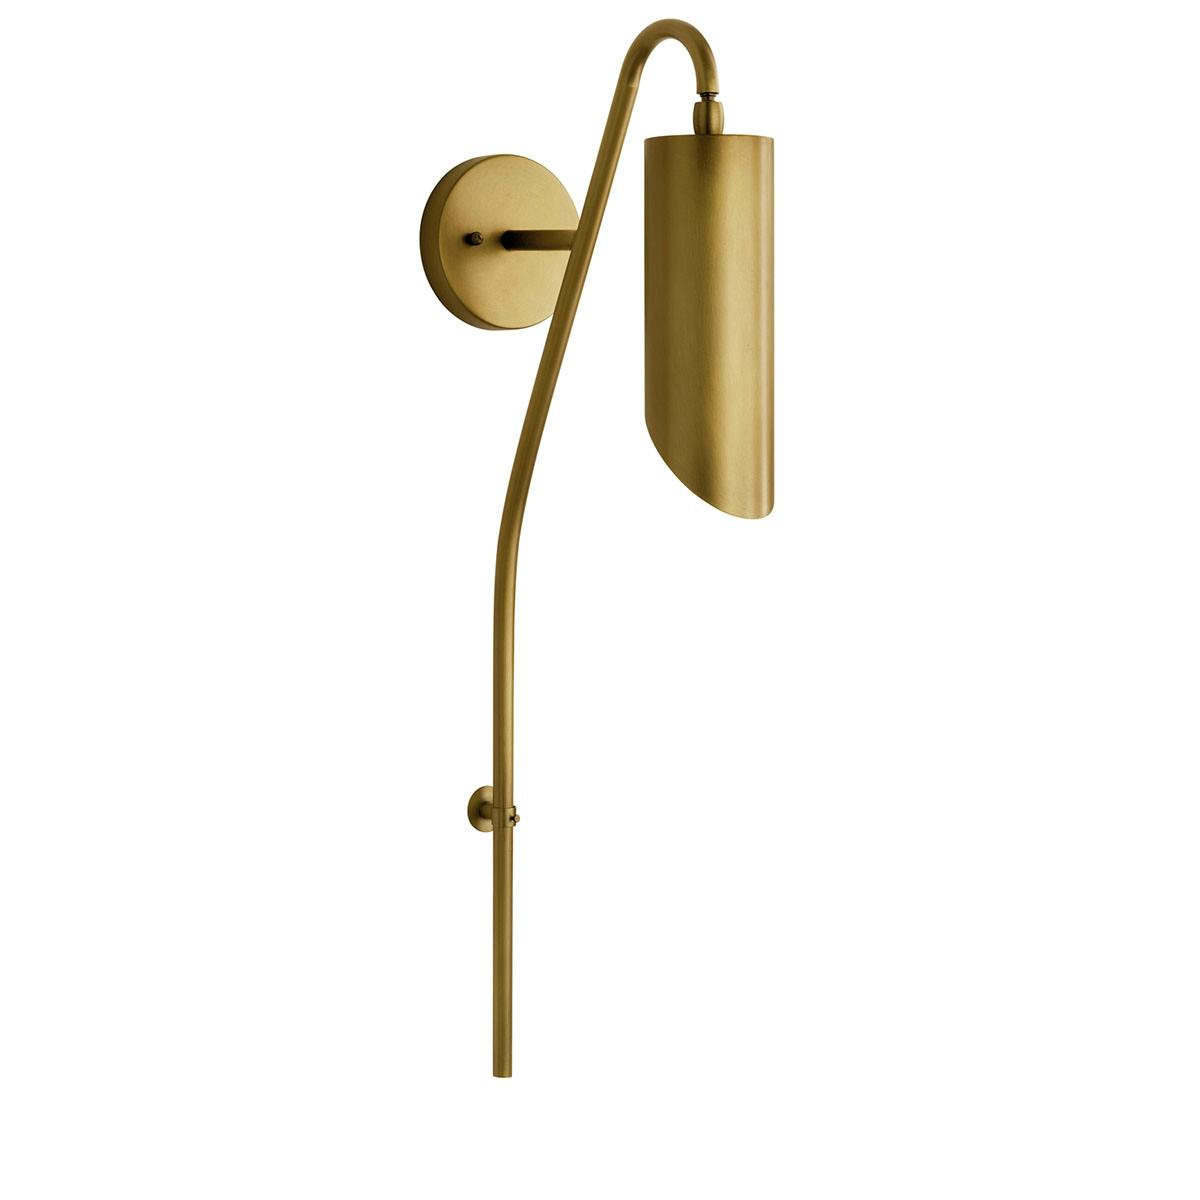 Trentino 1 Light Sconce Natural Brass on a white background